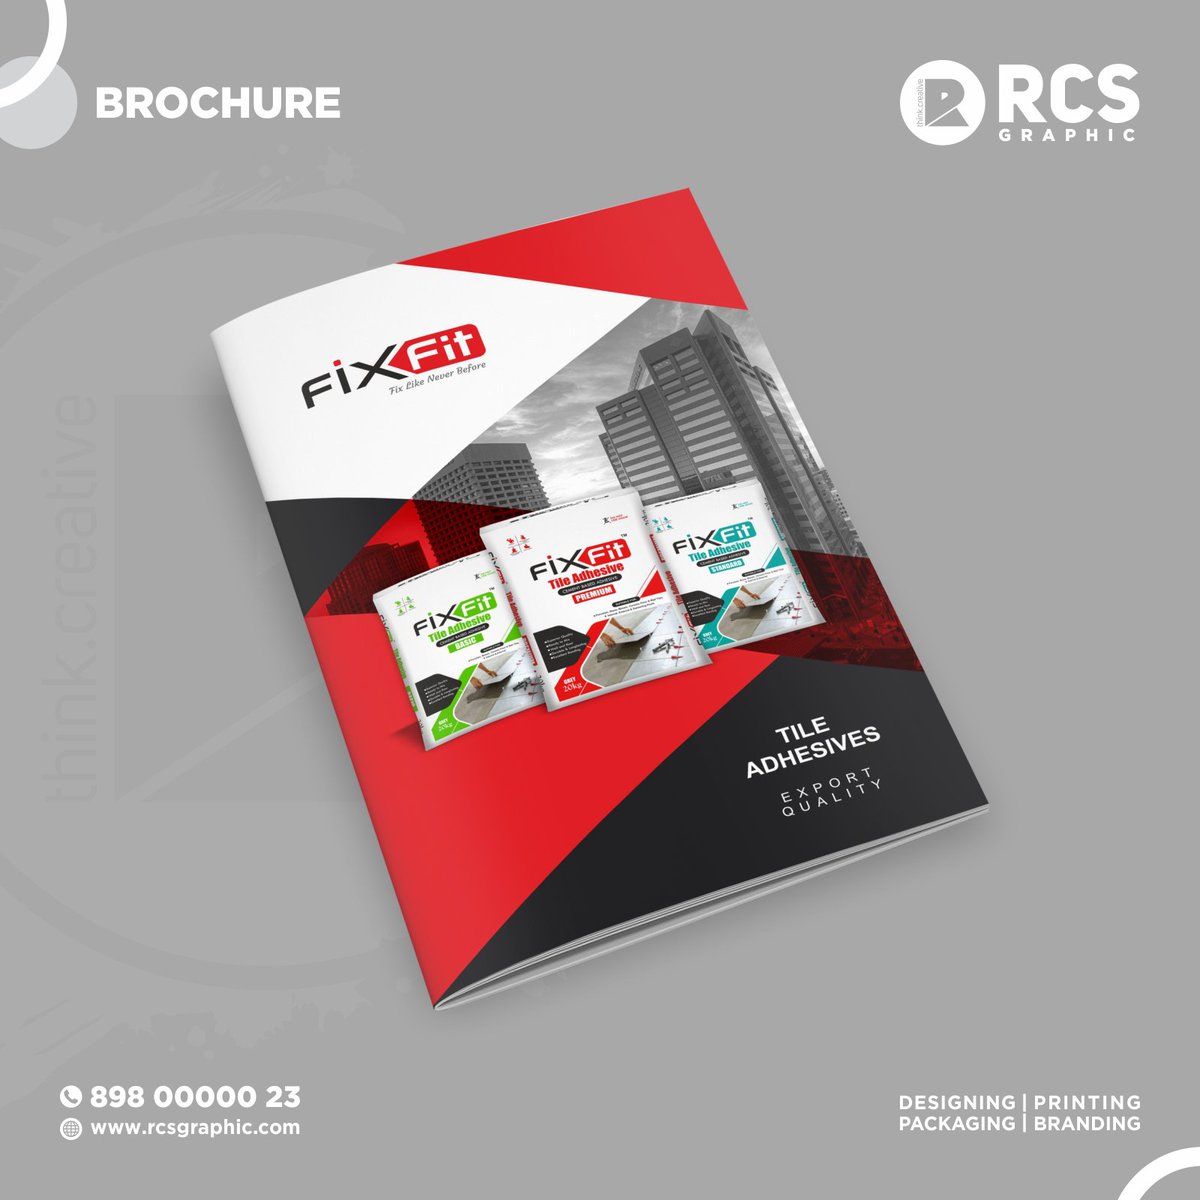 Marketing Brochure for #Fixfit #Tile #Adhesives

Contact: 8980000023
Email: rcsgraphic@gmail.com
Website: rcsgraphic.com

#rcsgraphic #brochure #designing #printing #branding #packaging #creativedesign #offsetprinting #tileadhesive #brandidentity #corporateidentity